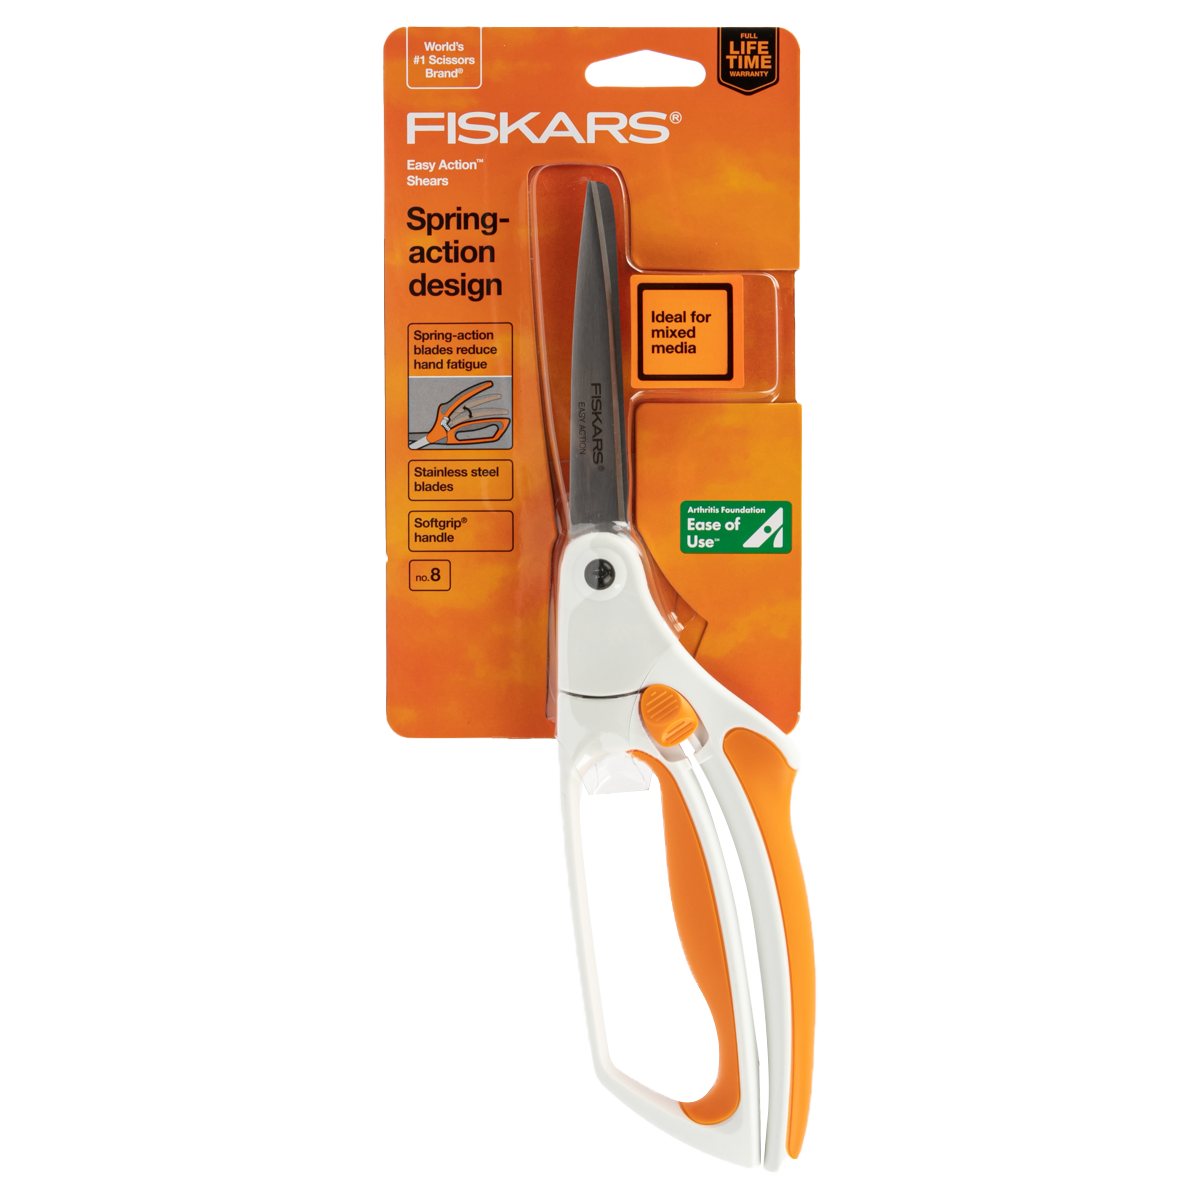 https://www.shopriot.shop/wp-content/uploads/1689/11/fiskars-softouch-multi-purpose-scissor-264-shop-for-the-latest-trends-and-innovators_0.png